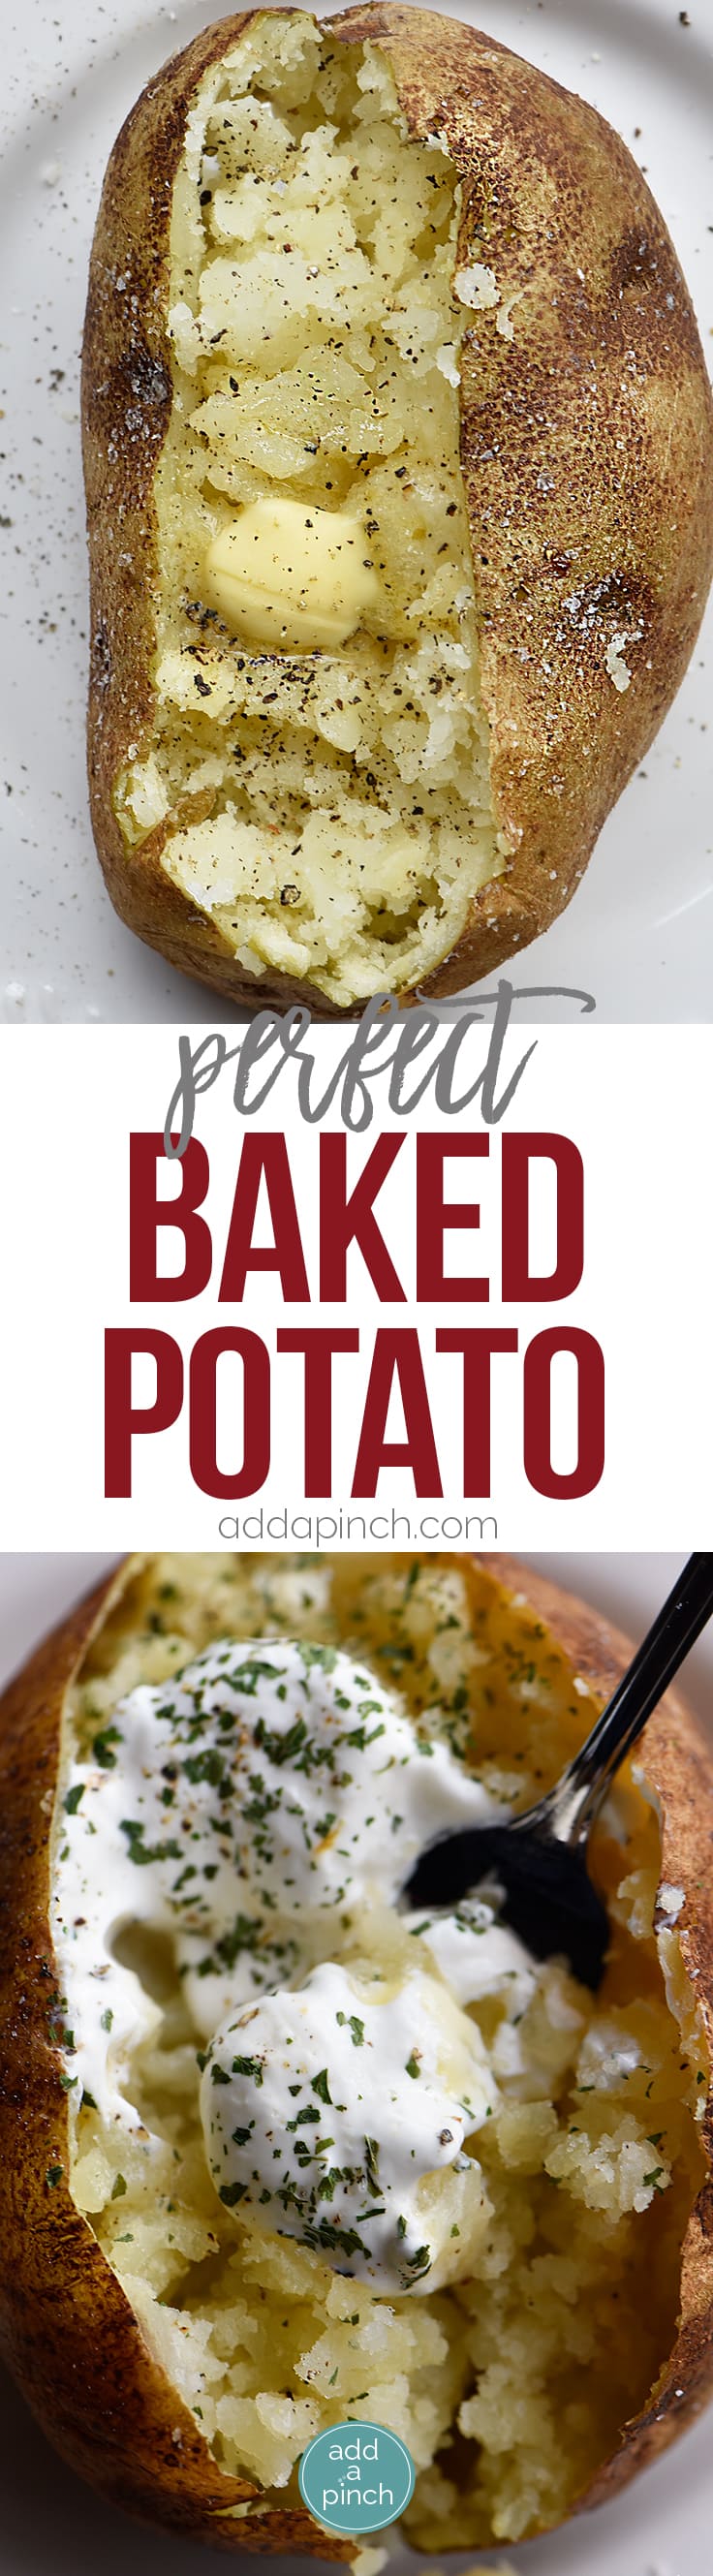 Perfect Baked Potato Recipe - The perfect baked potato recipe for a crispy, golden skin and a fluffy, tender inside. Learn how to make the best baked potatoes every time! // addapinch.com